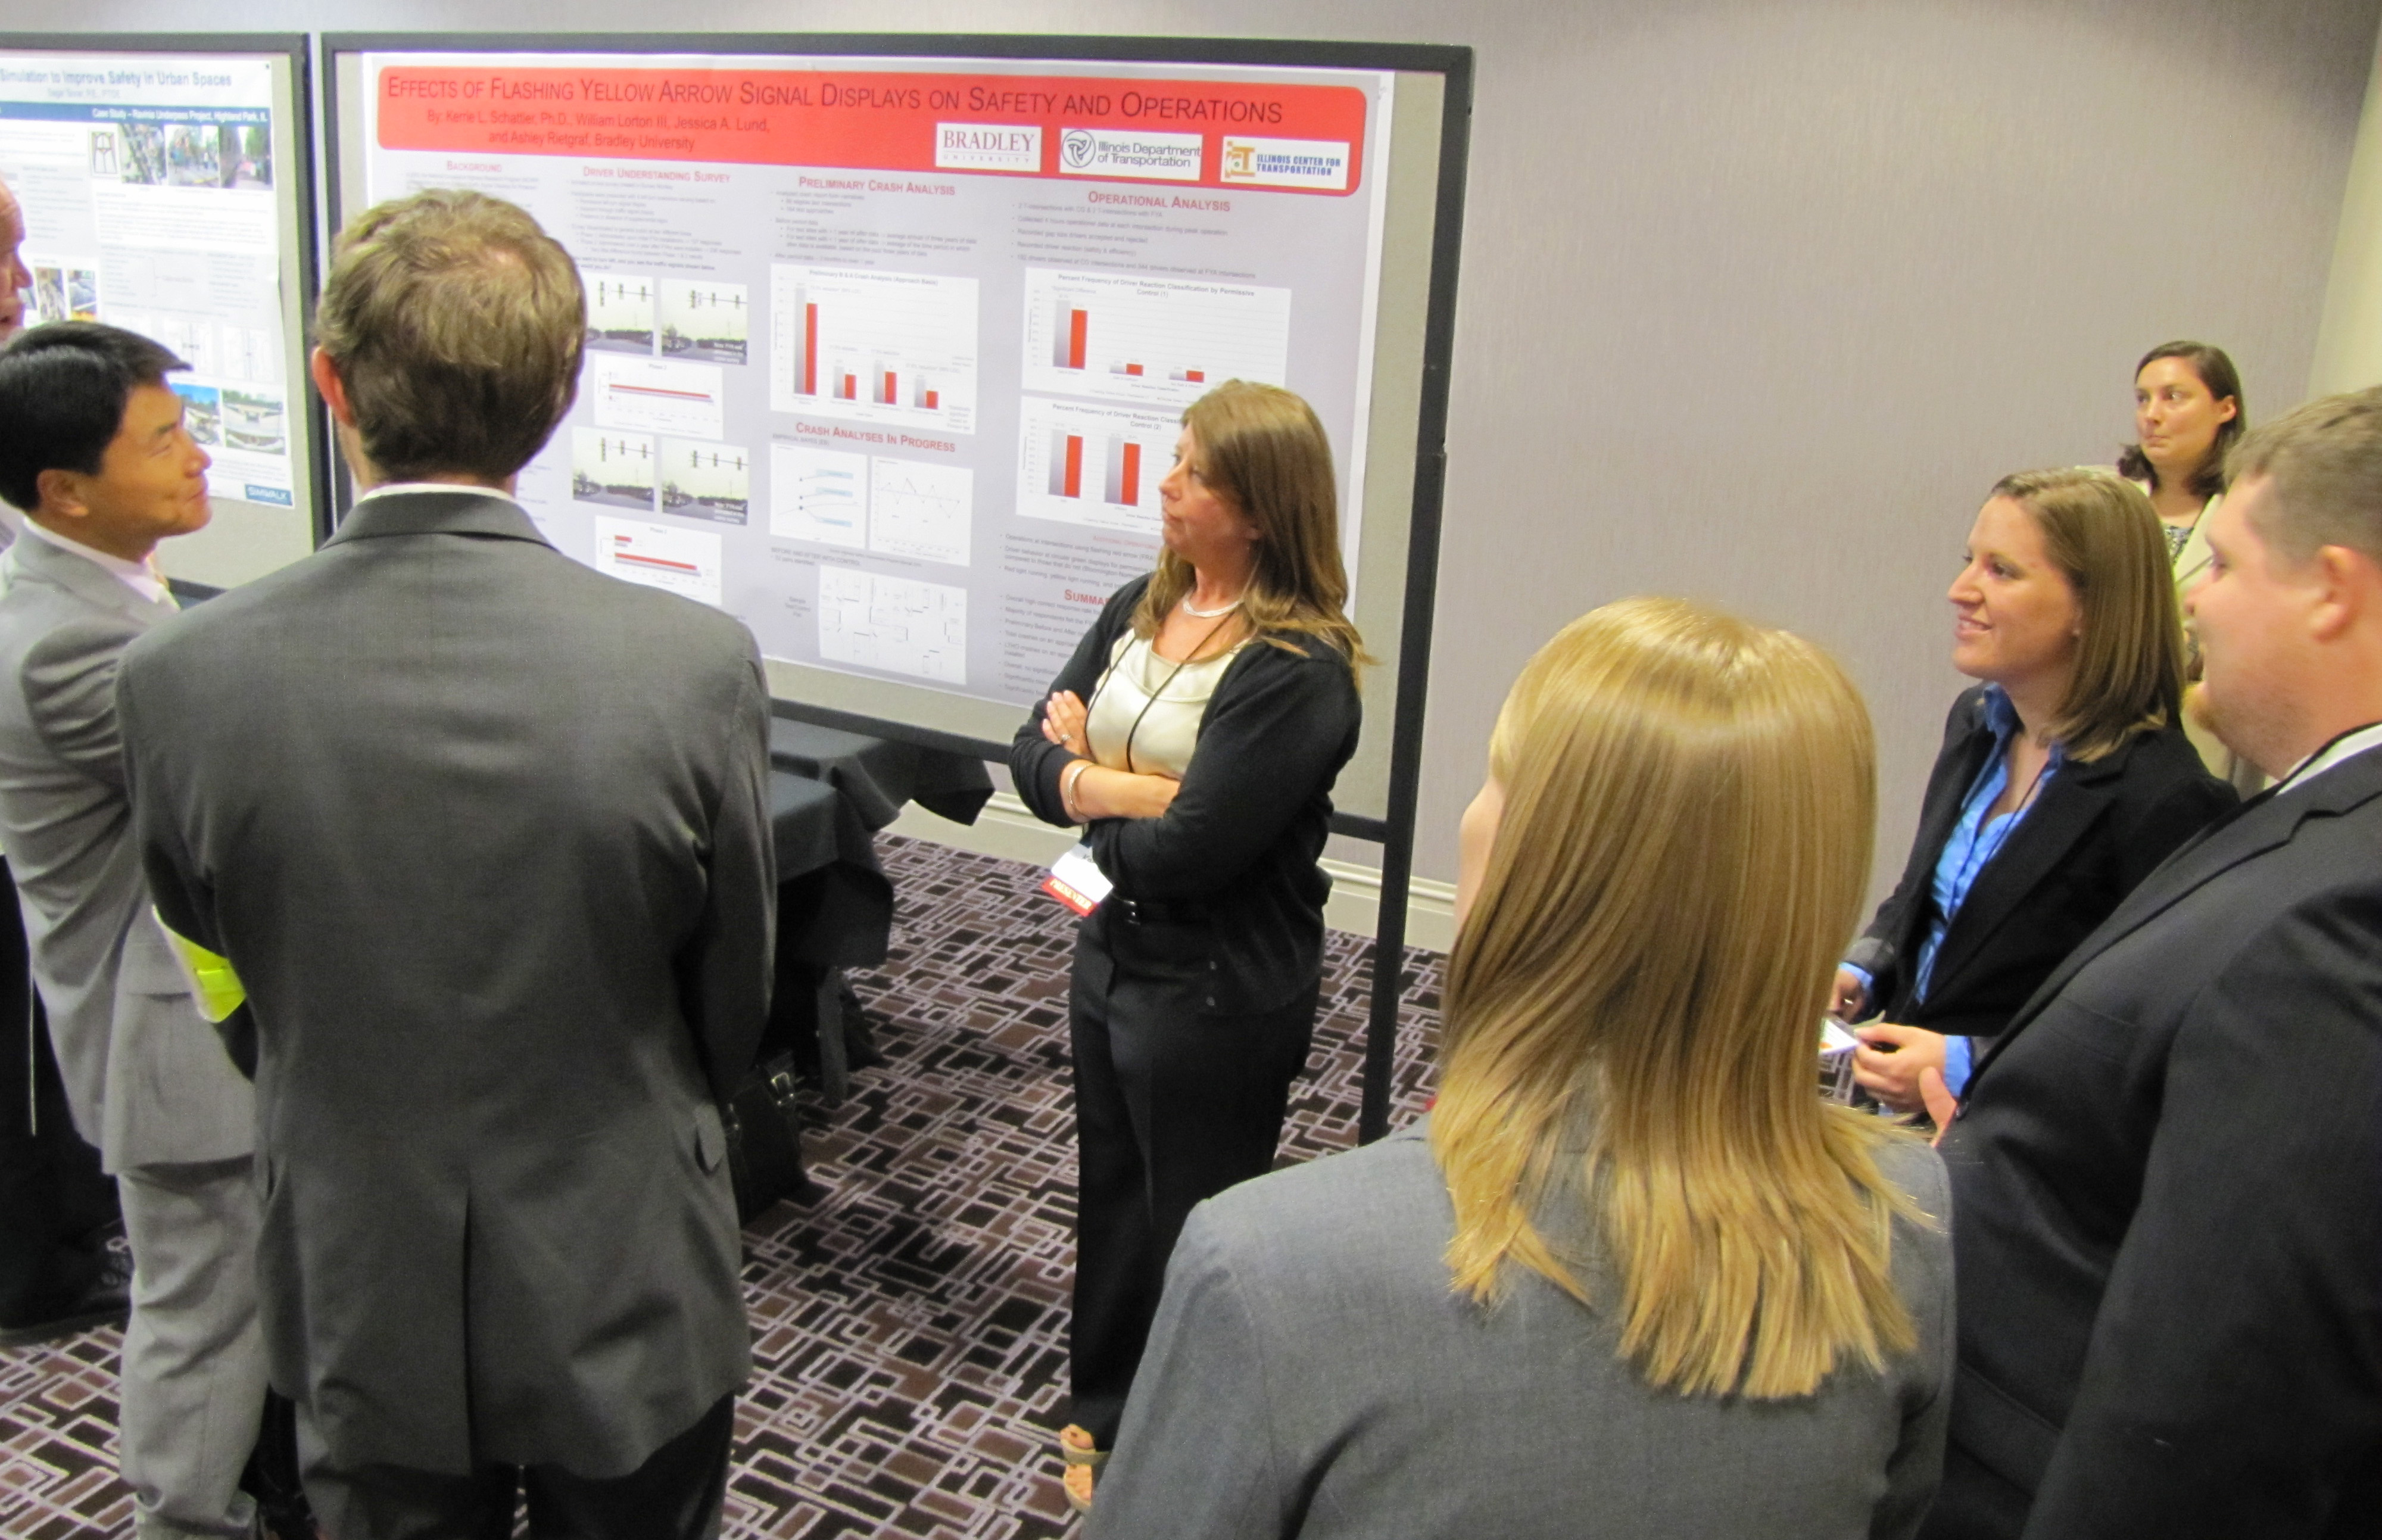 4th Urban Street Symposium: group discussion during a poster session